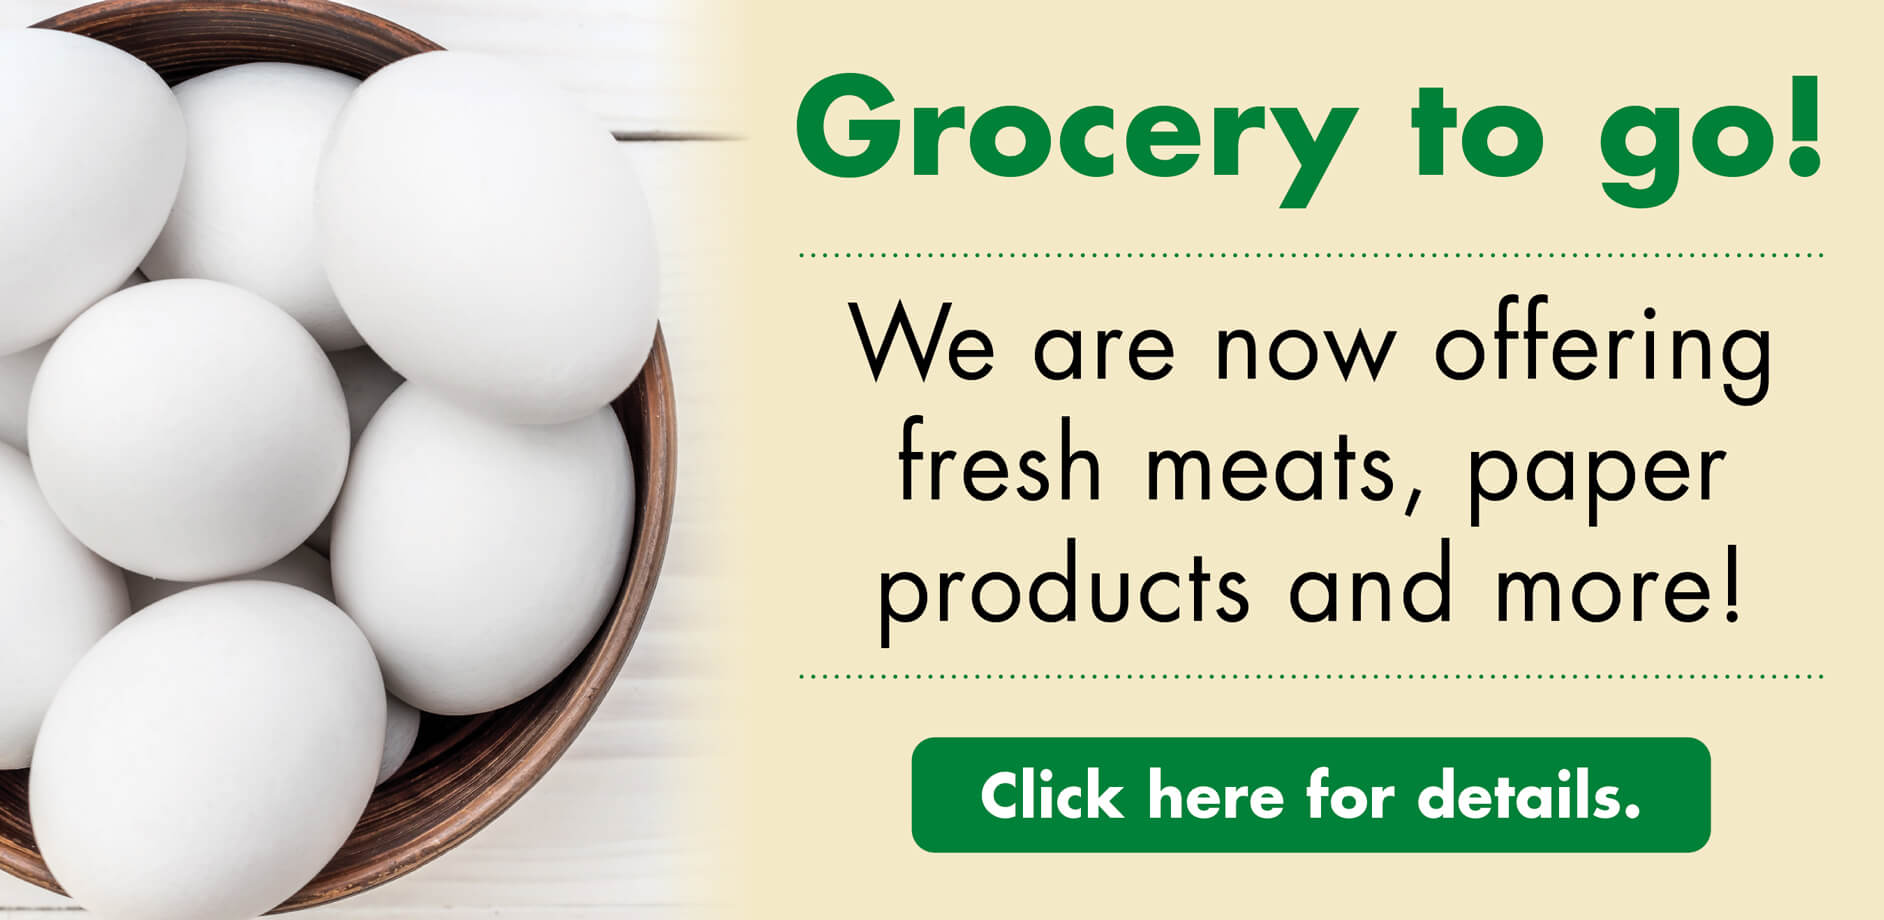 Grocery to go! We are now offering fresh meats, paper products and more! Click here for details.